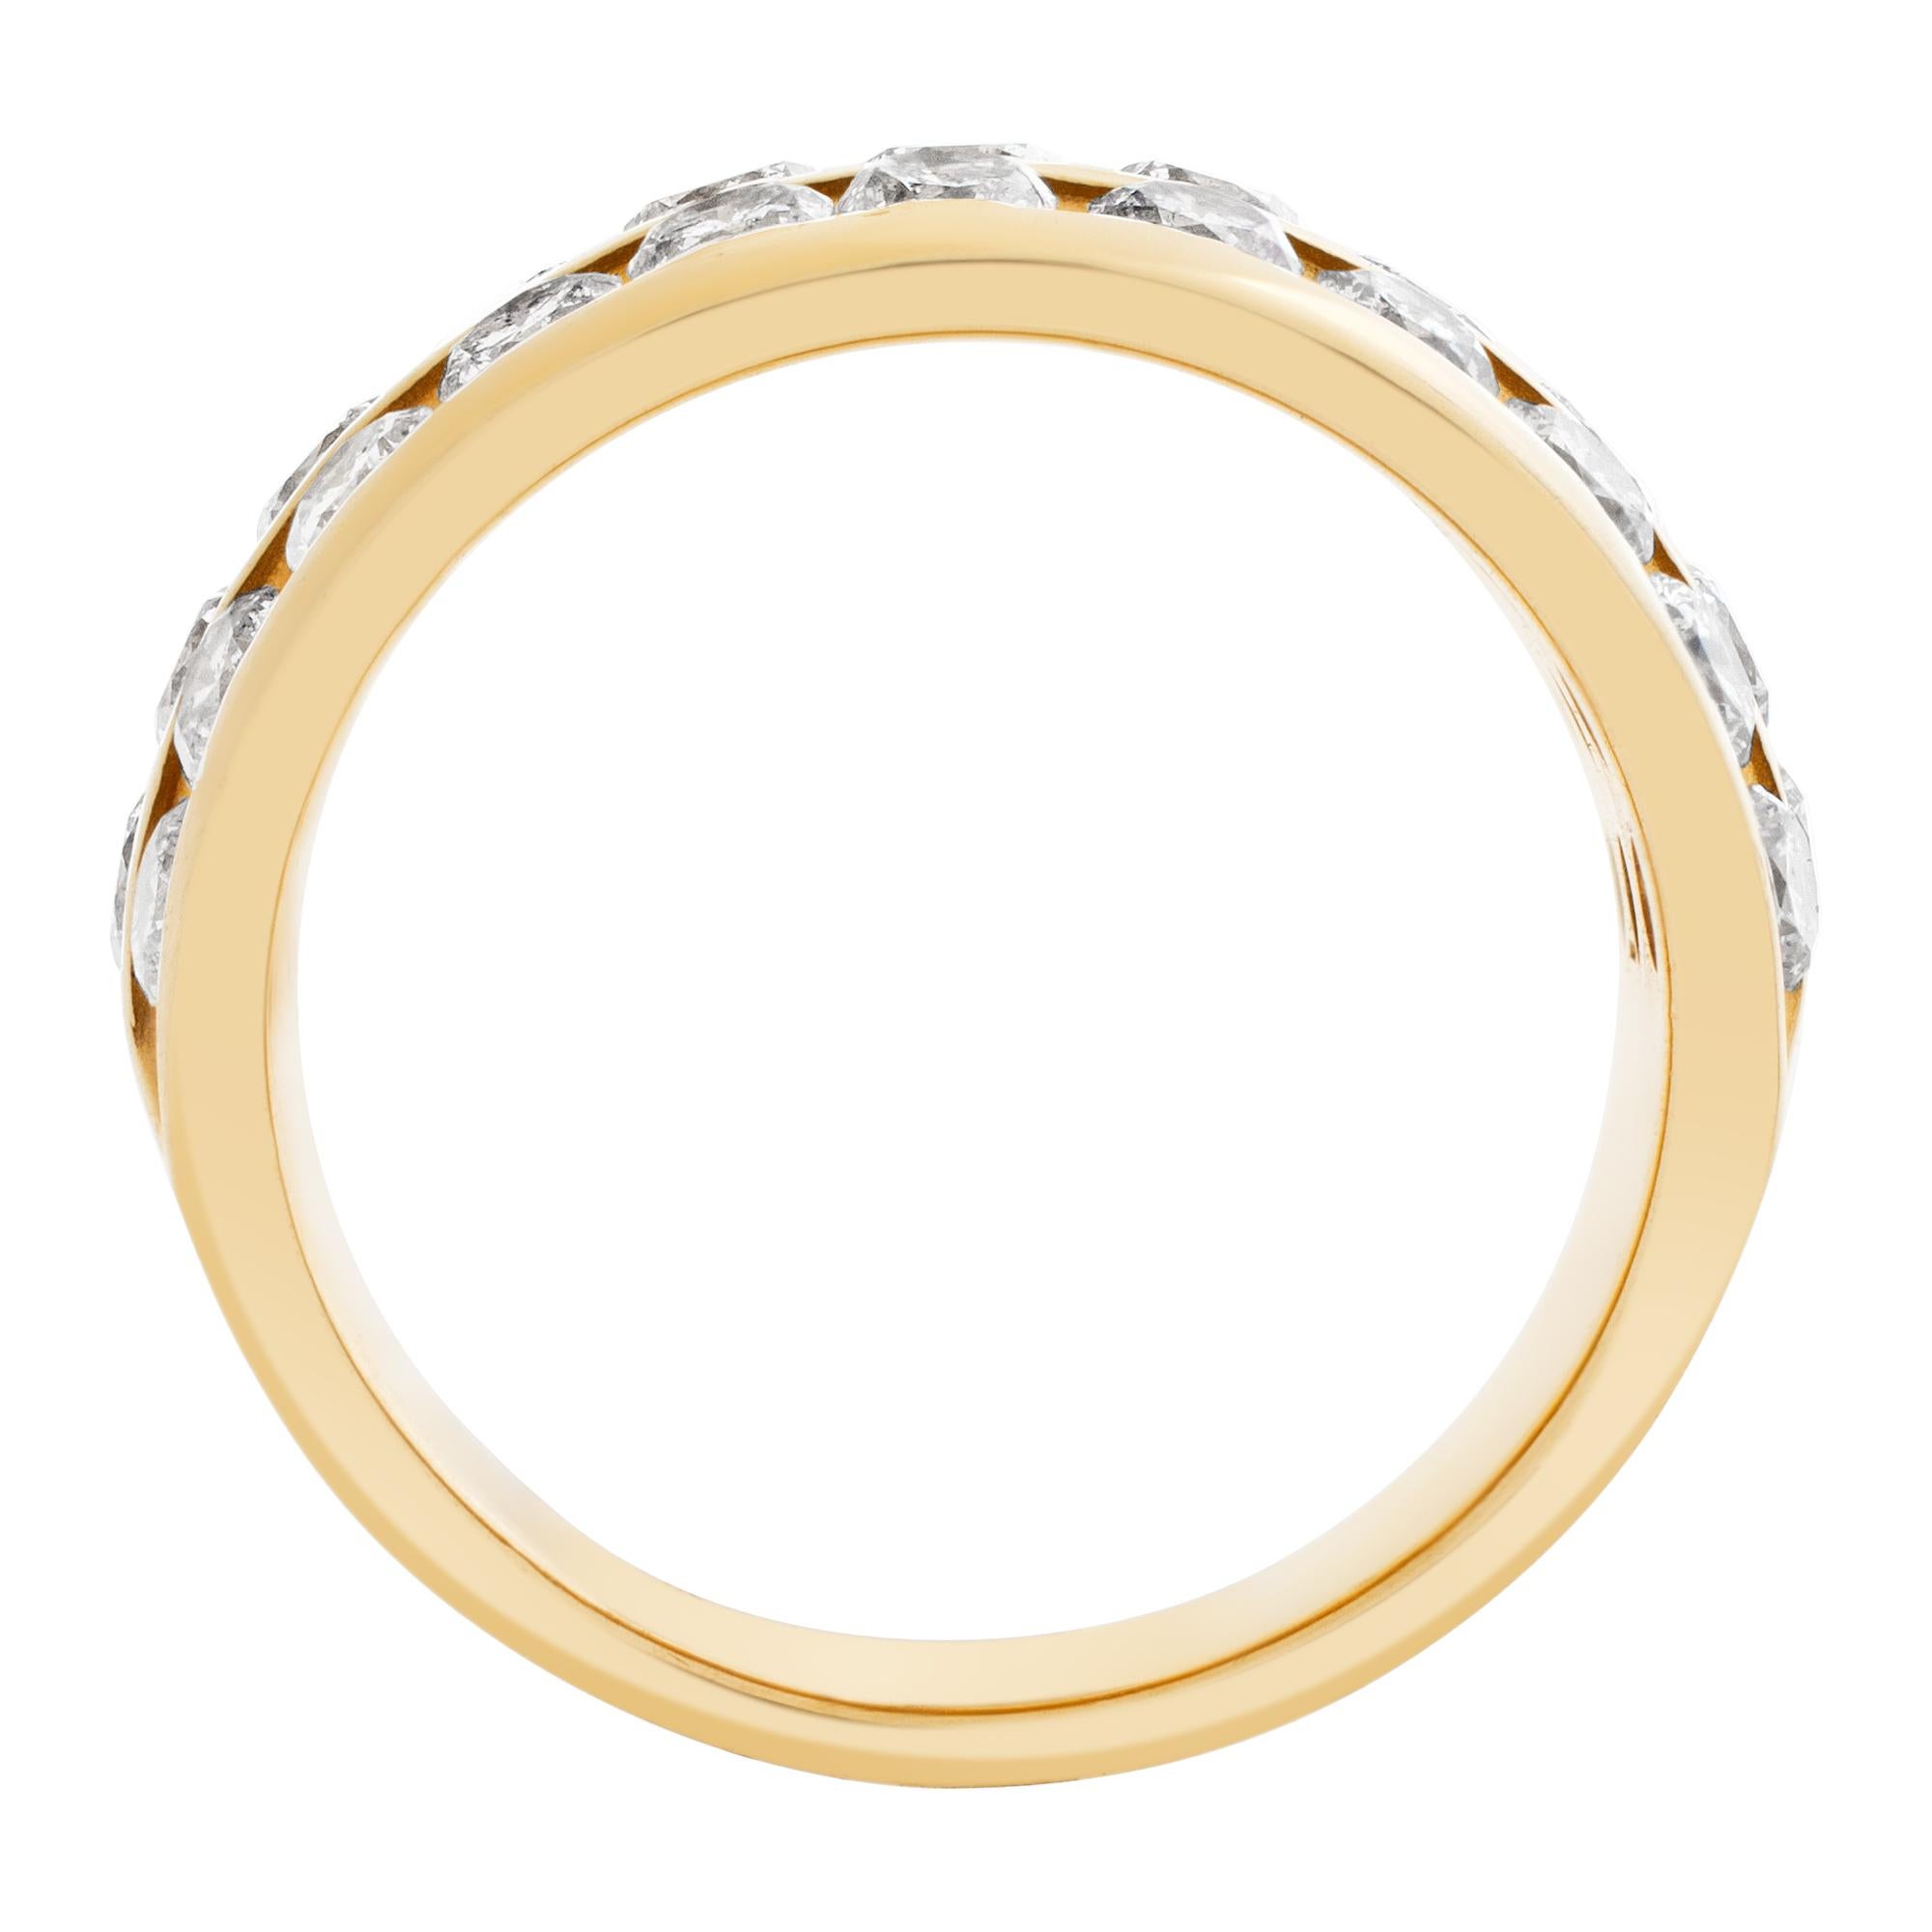 Women's Ring Band in 14k Yellow Gold, 1.50 Carats in 3 Rows of Channel Set Diamonds For Sale